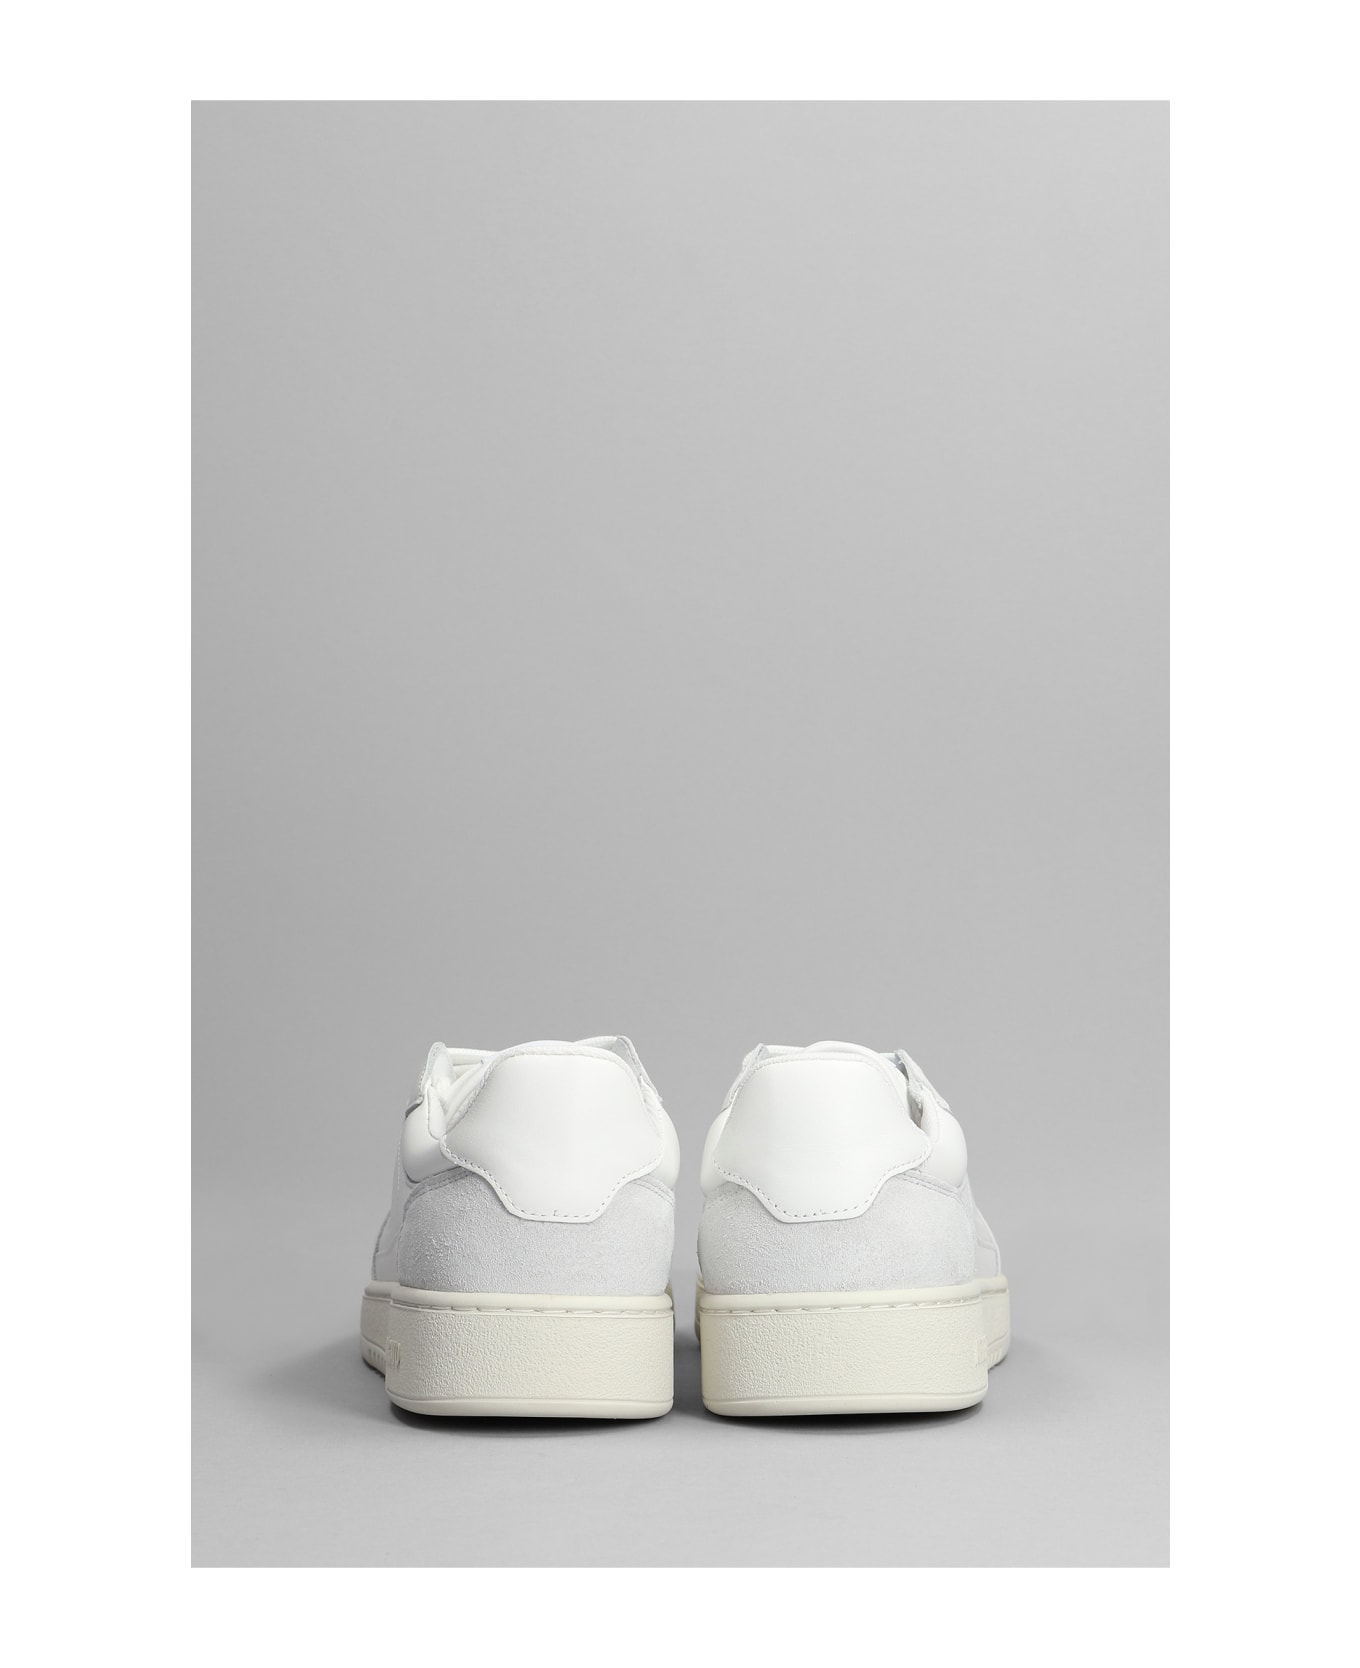 Axel Arigato Dice Lo Sneakers In White Leather - Bianco